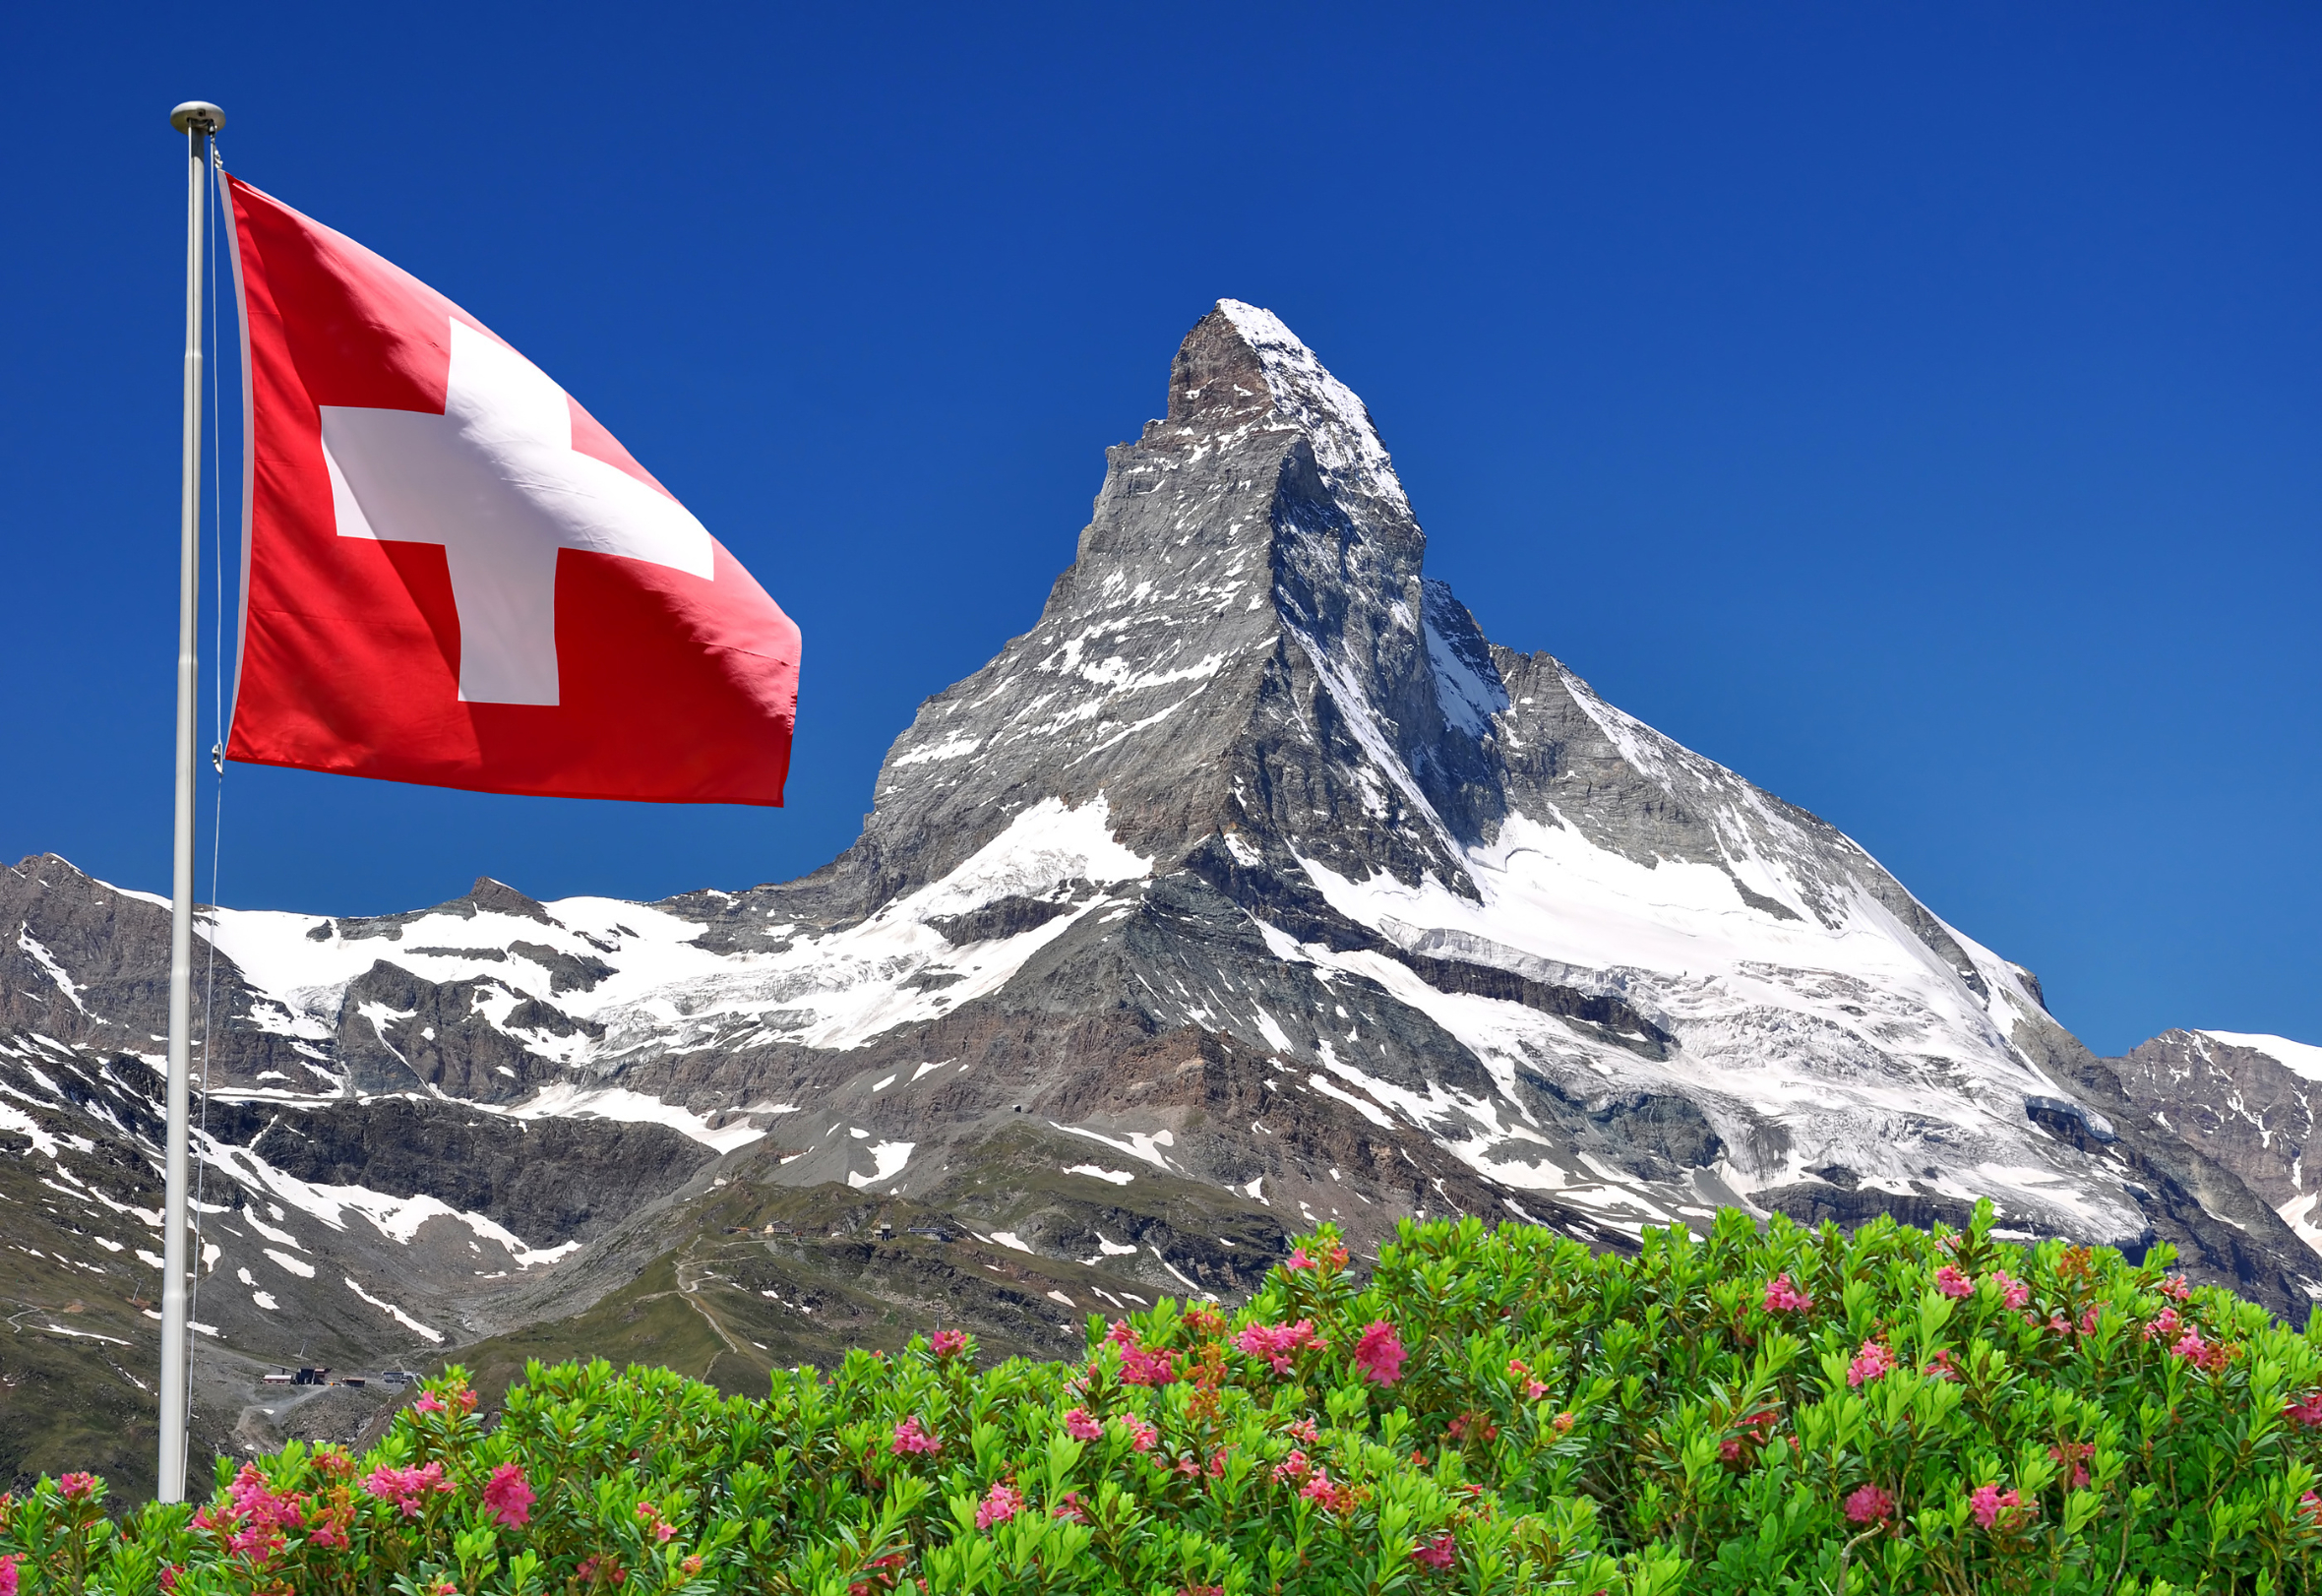 Every year, international rankings provide statistical affirmation of Switzerland's world-class standing.